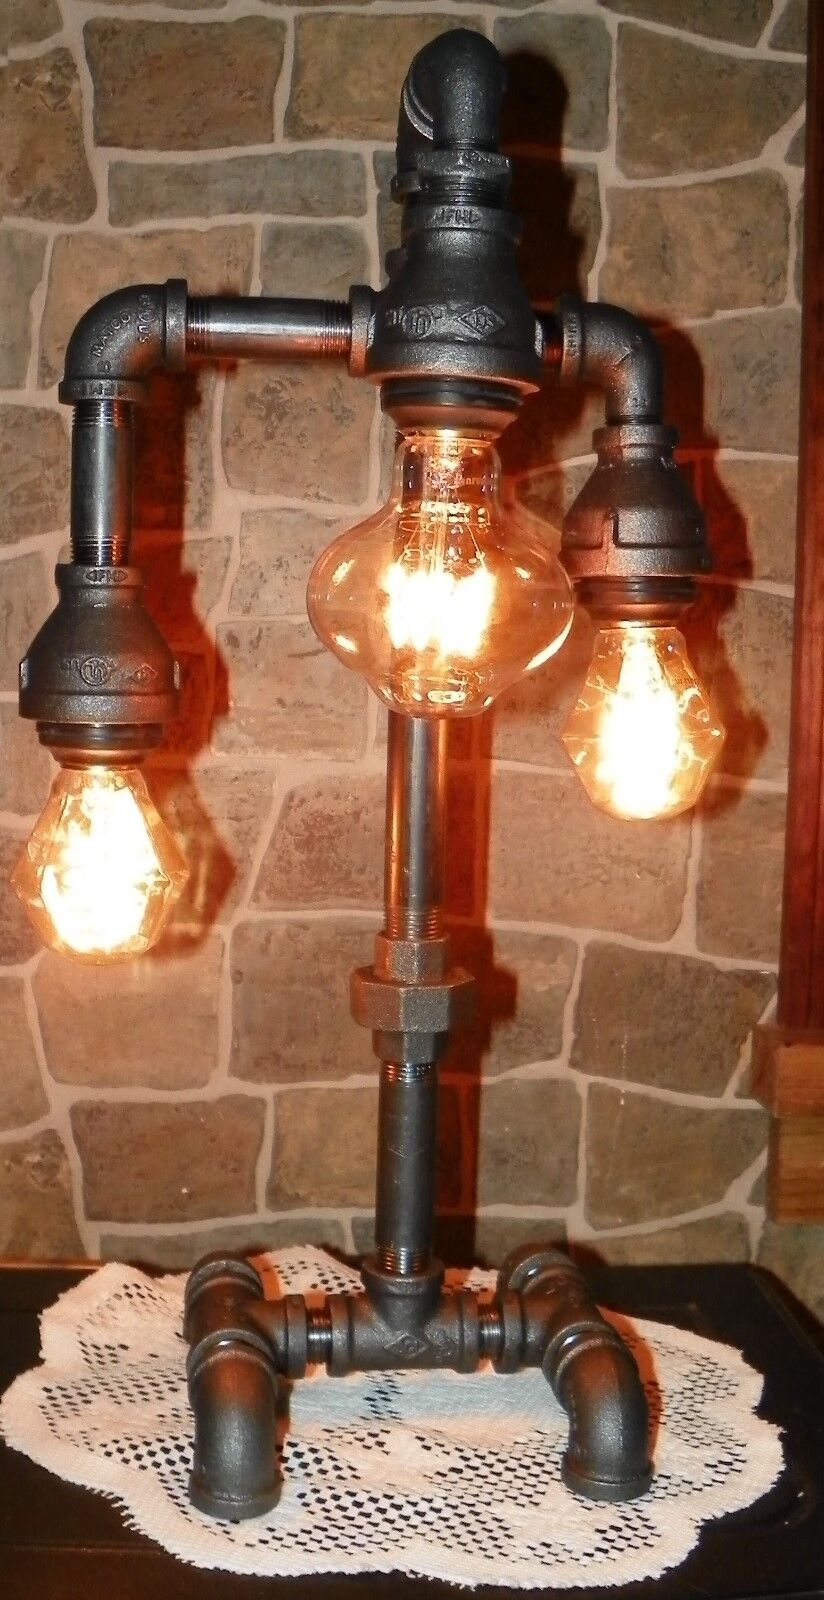  Industrial Pipe Three Tier Lamp steampunk style with vintage bulbs